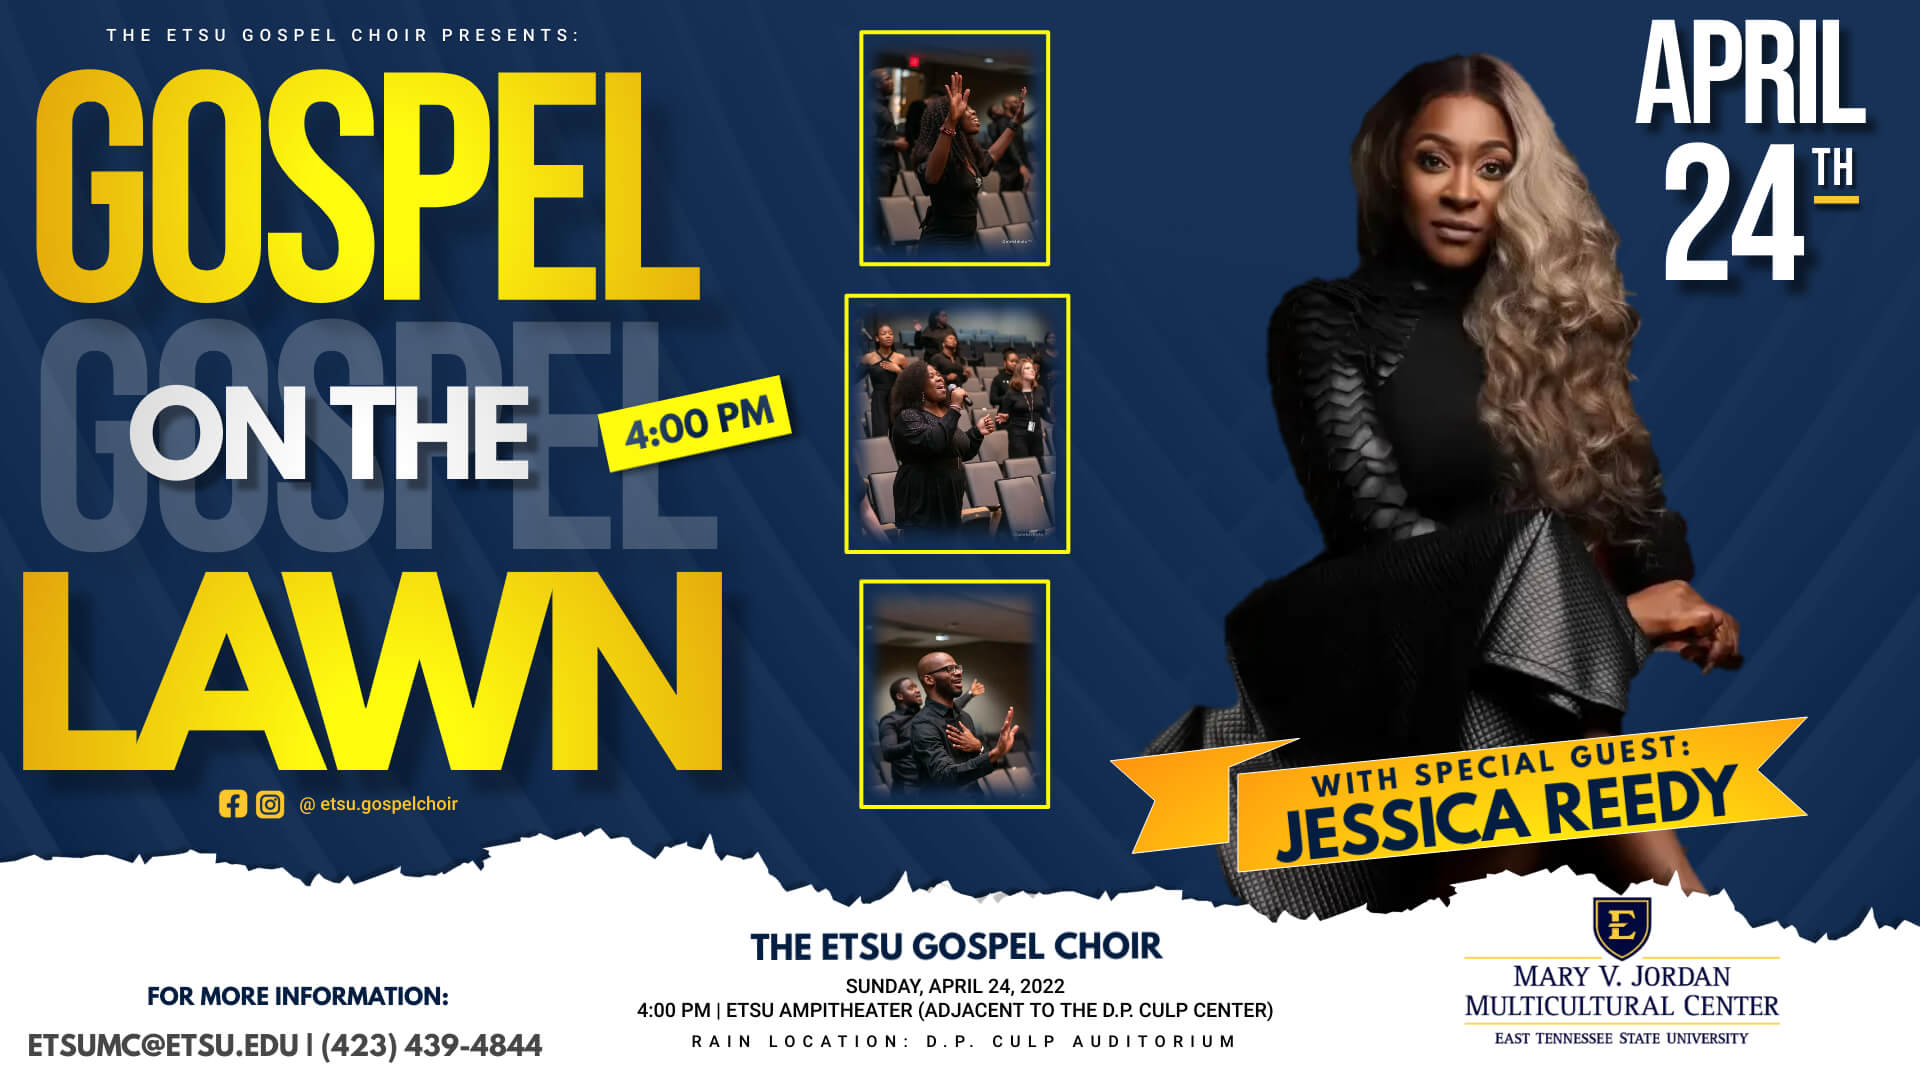 Gospel on the Lawn flyer with event information detailed in the commentary above.